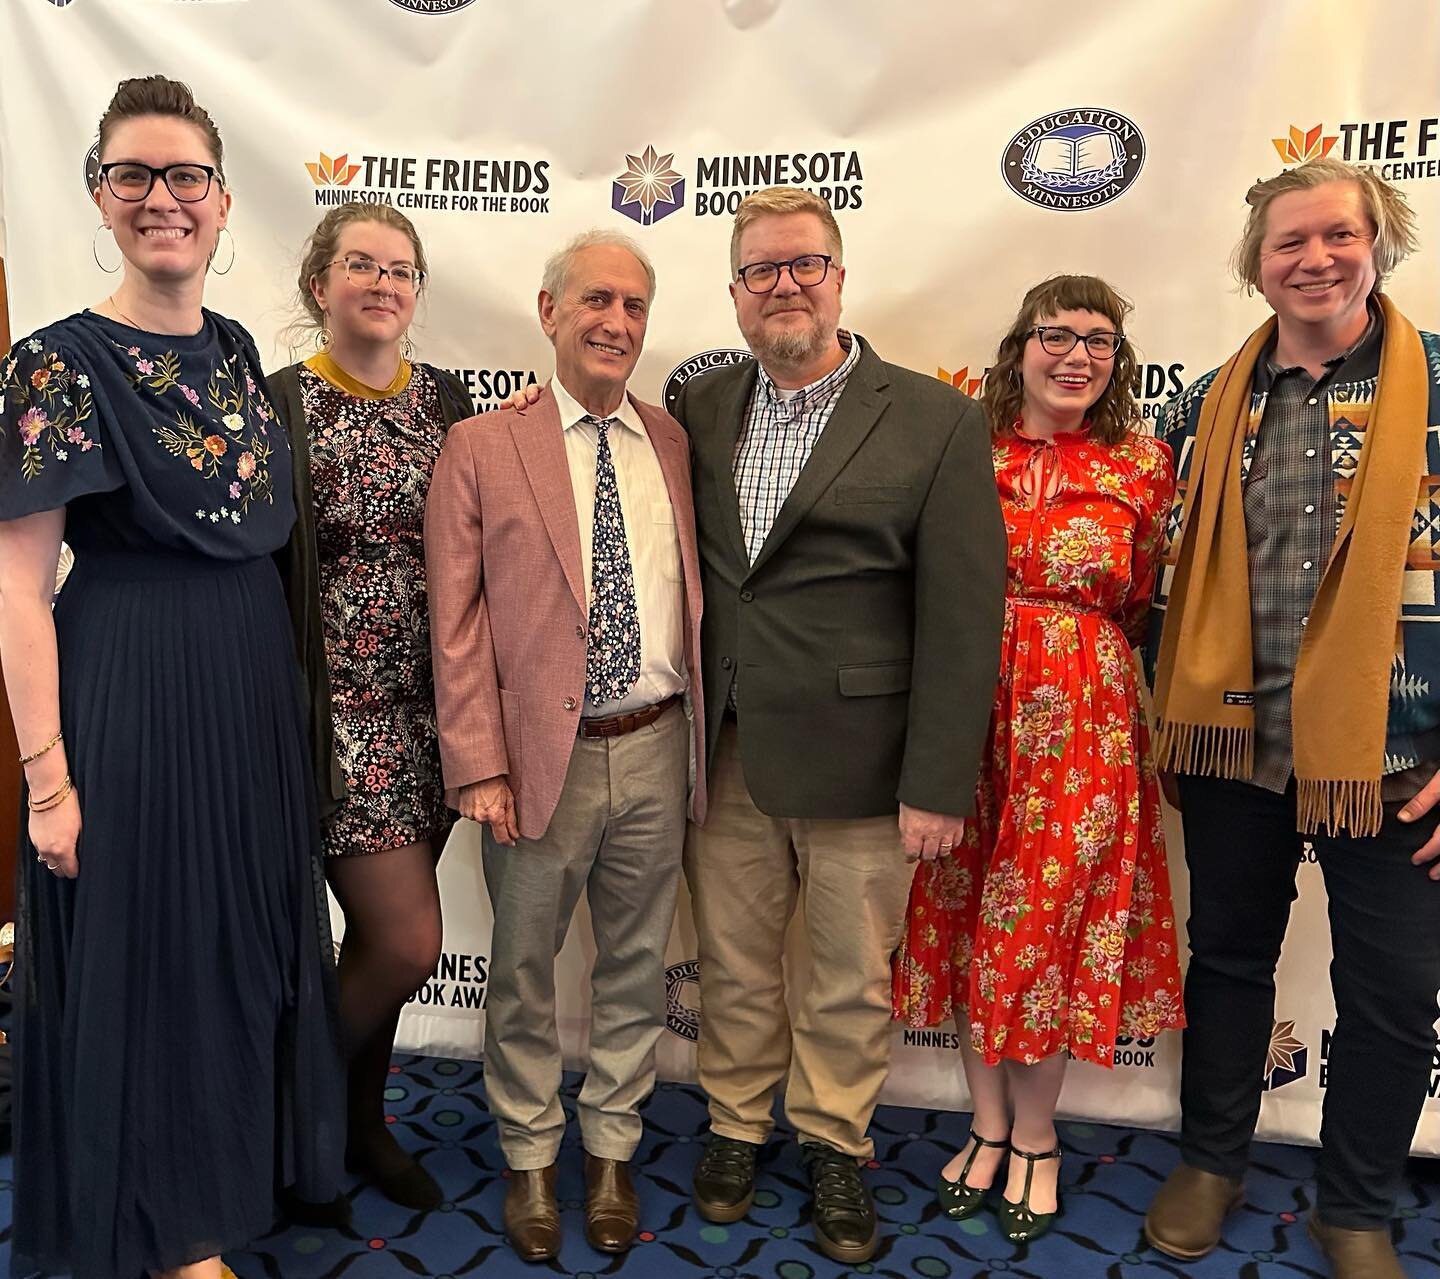 What a night! 🤩 We&rsquo;re still buzzing with pride over Stu&rsquo;s incredible honor, recieving the 2023 Kay Sexton Award tonight. Thank you to the @mnbookawards and everyone else who made this happen. And congrats to all of the other winners toni